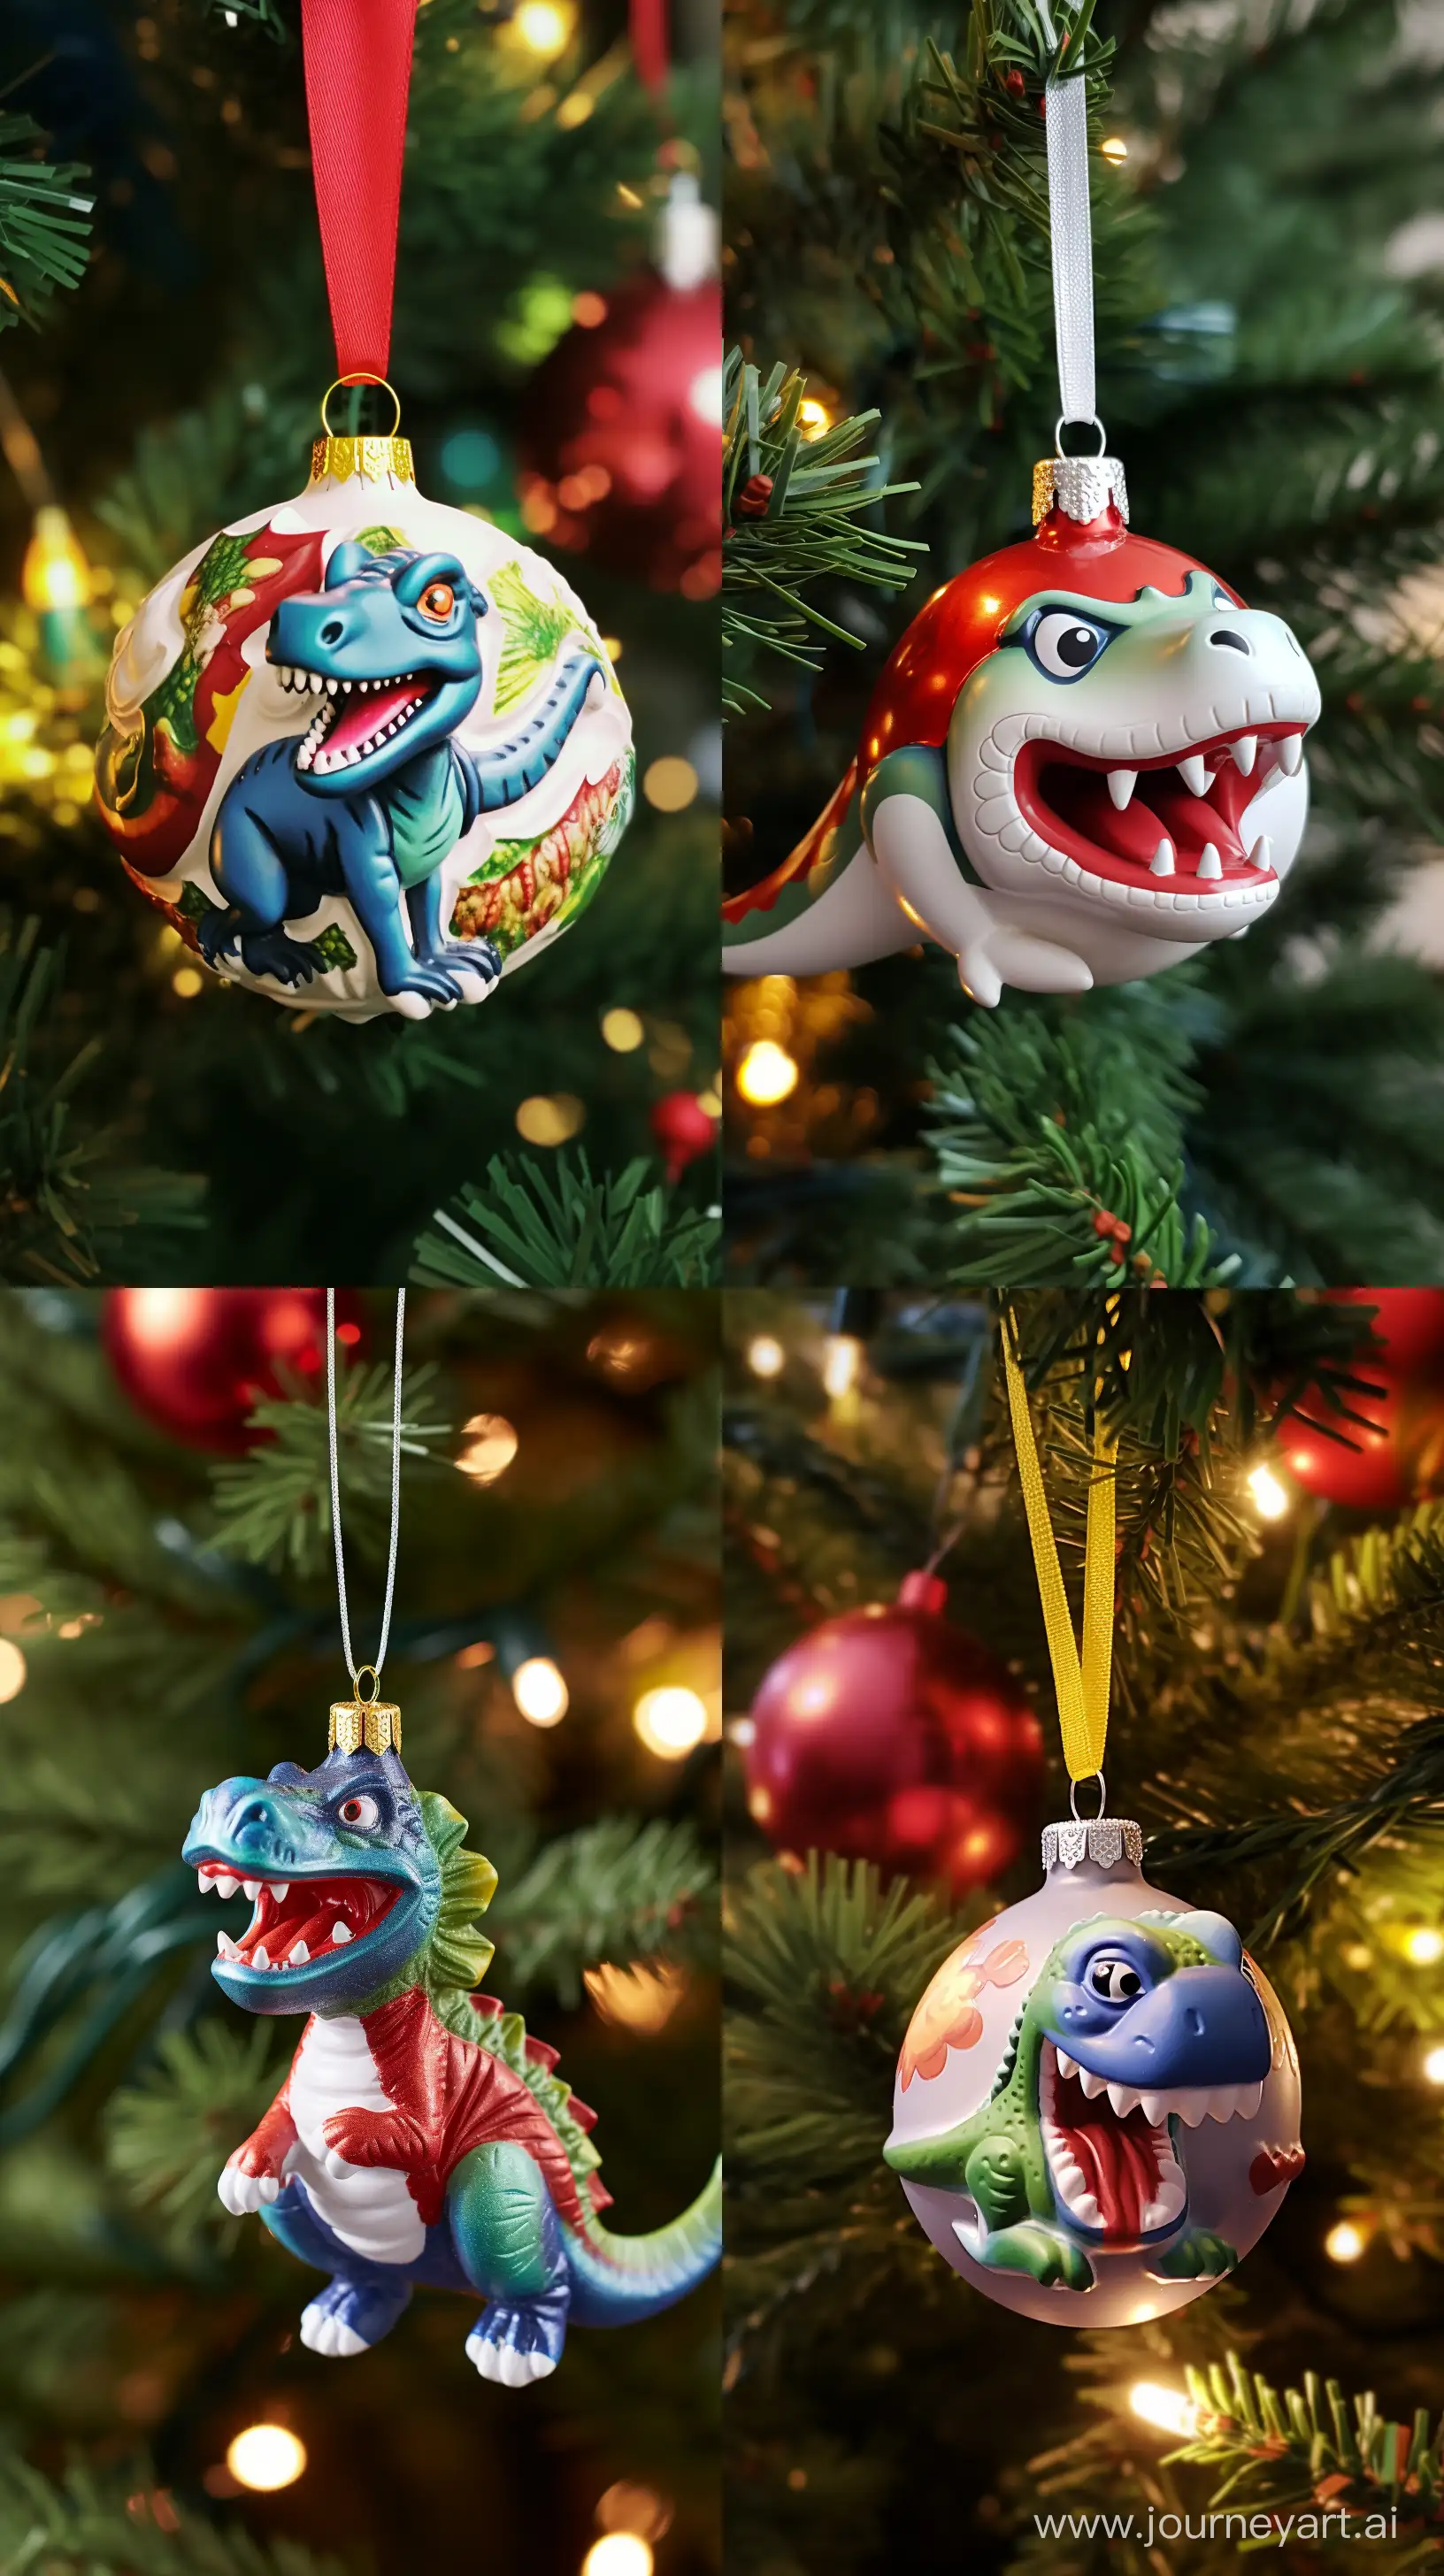 A single Christmas bauble designed like a colorful cartoon dinosaur, complete with a playful expression and a tiny Santa hat, adding a prehistoric twist to the tree decorations --ar 9:16